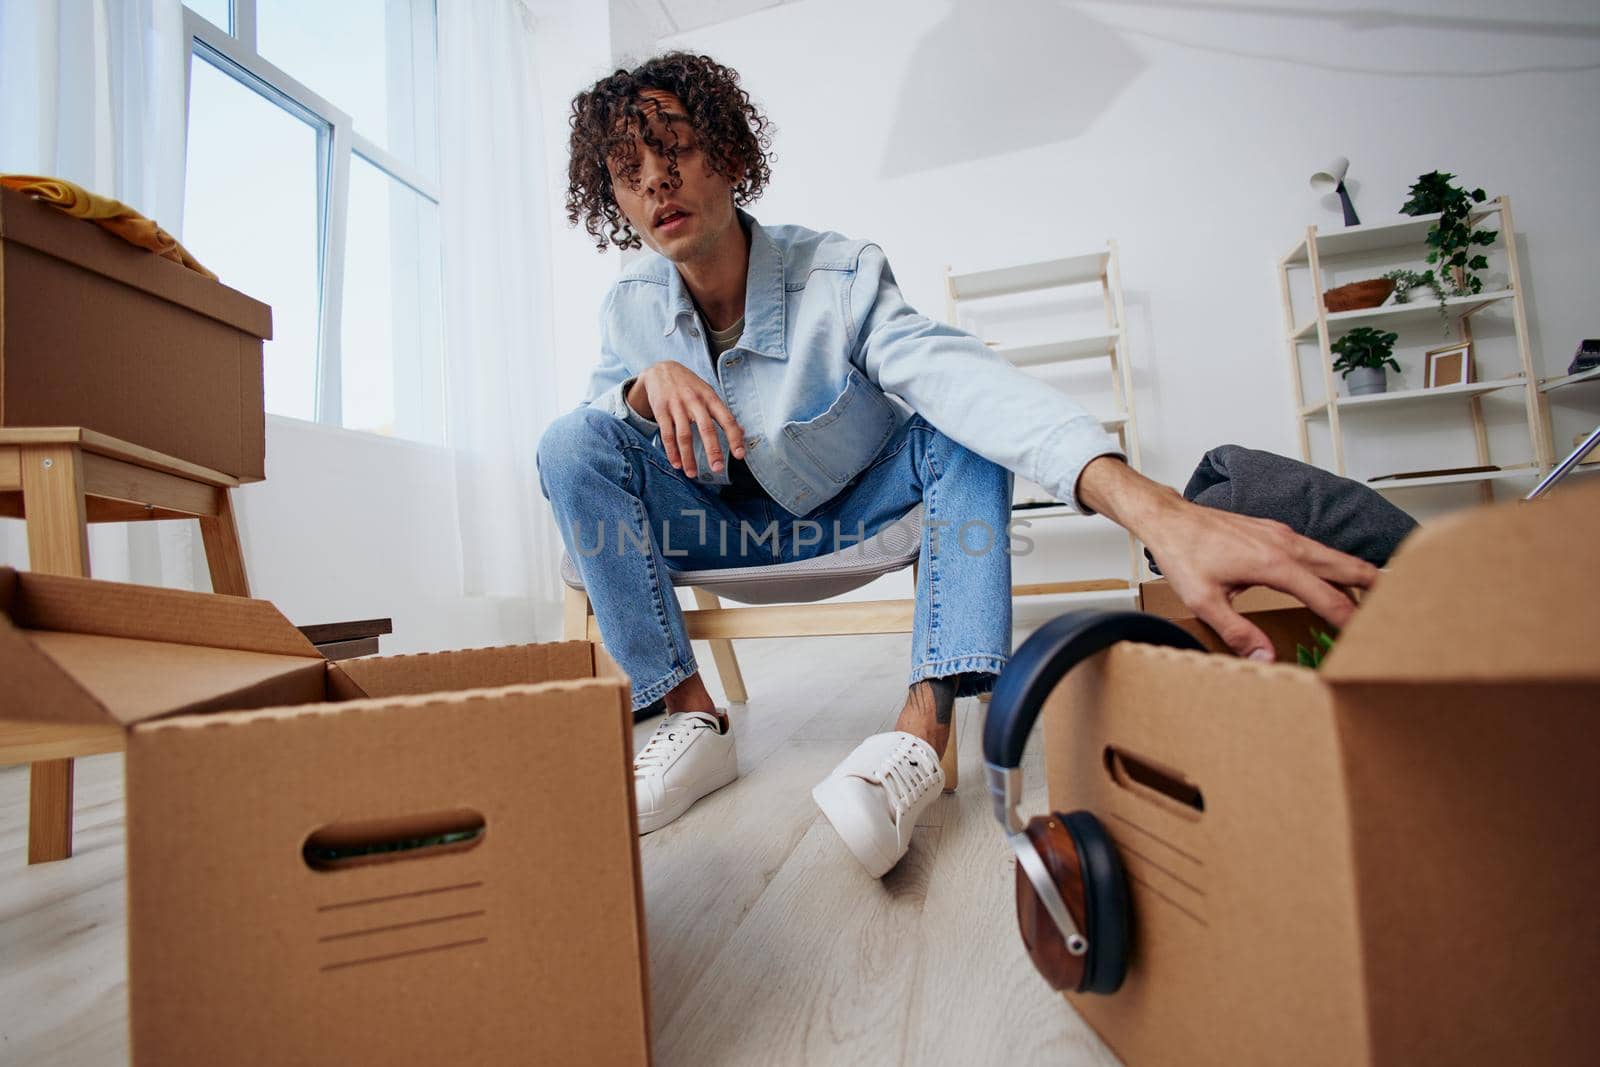 A young man cardboard boxes in the room unpacking headphones Lifestyle. High quality photo